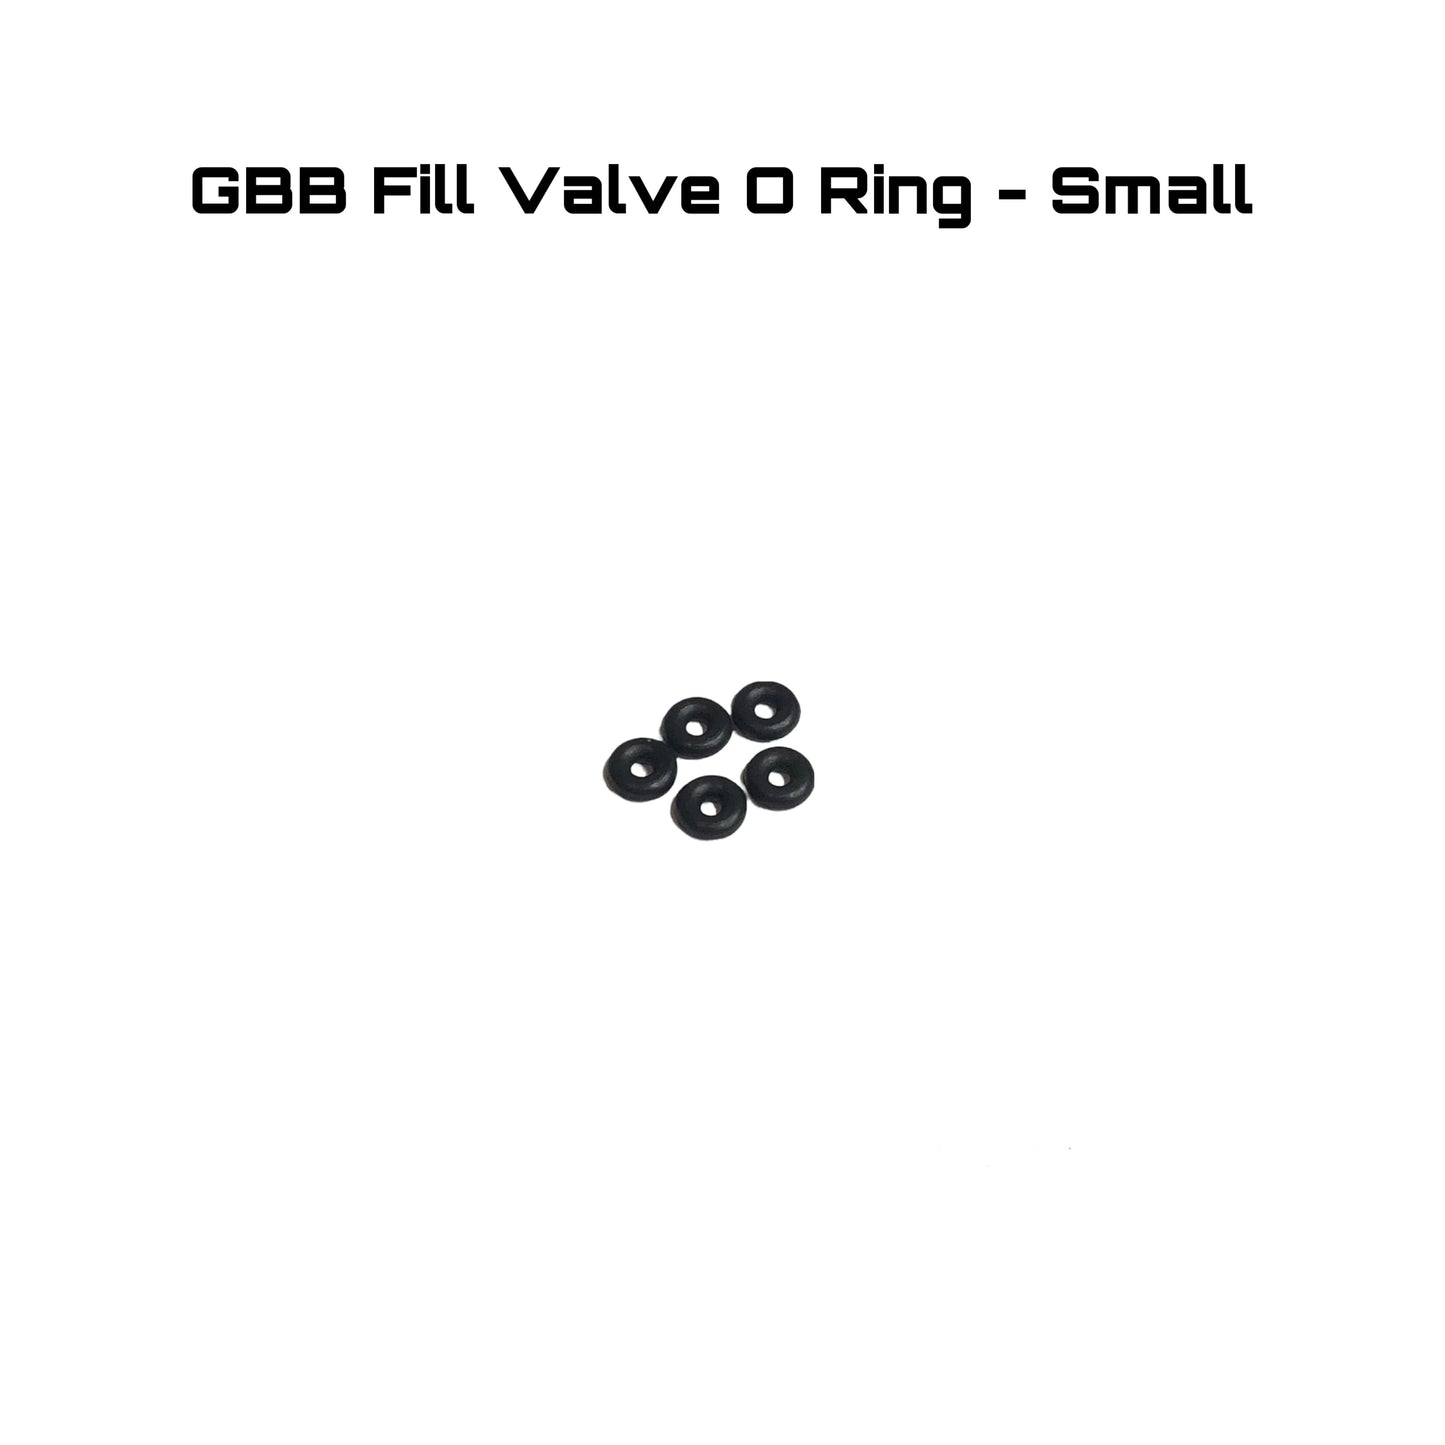 Real Deal GBB Fill Valve Small